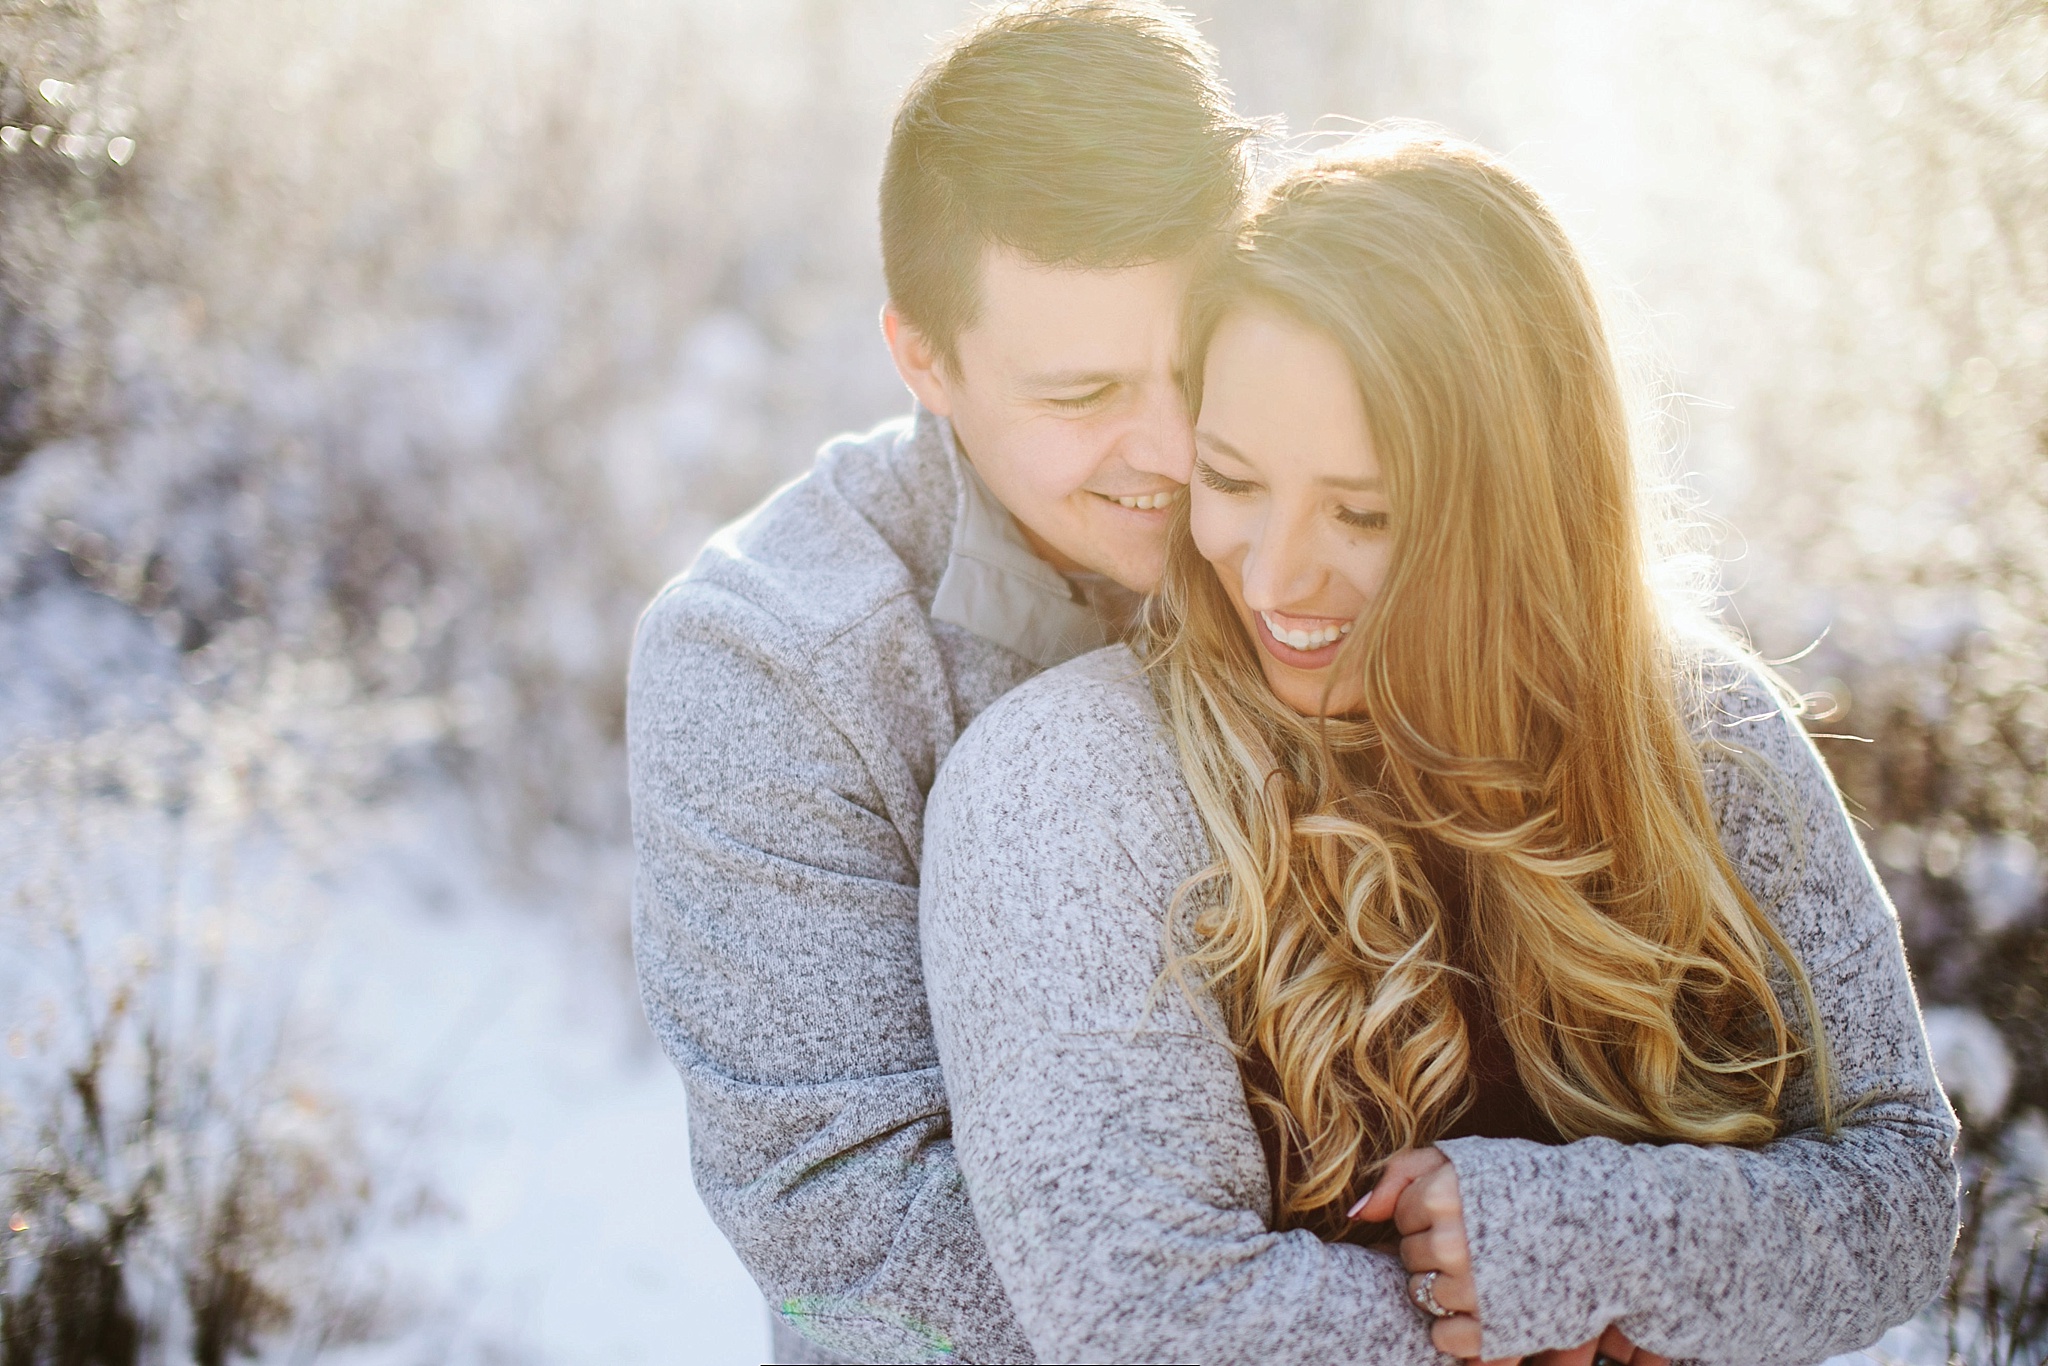 Missoula MT Winter Engagement Photos Bride and Groom Laughing